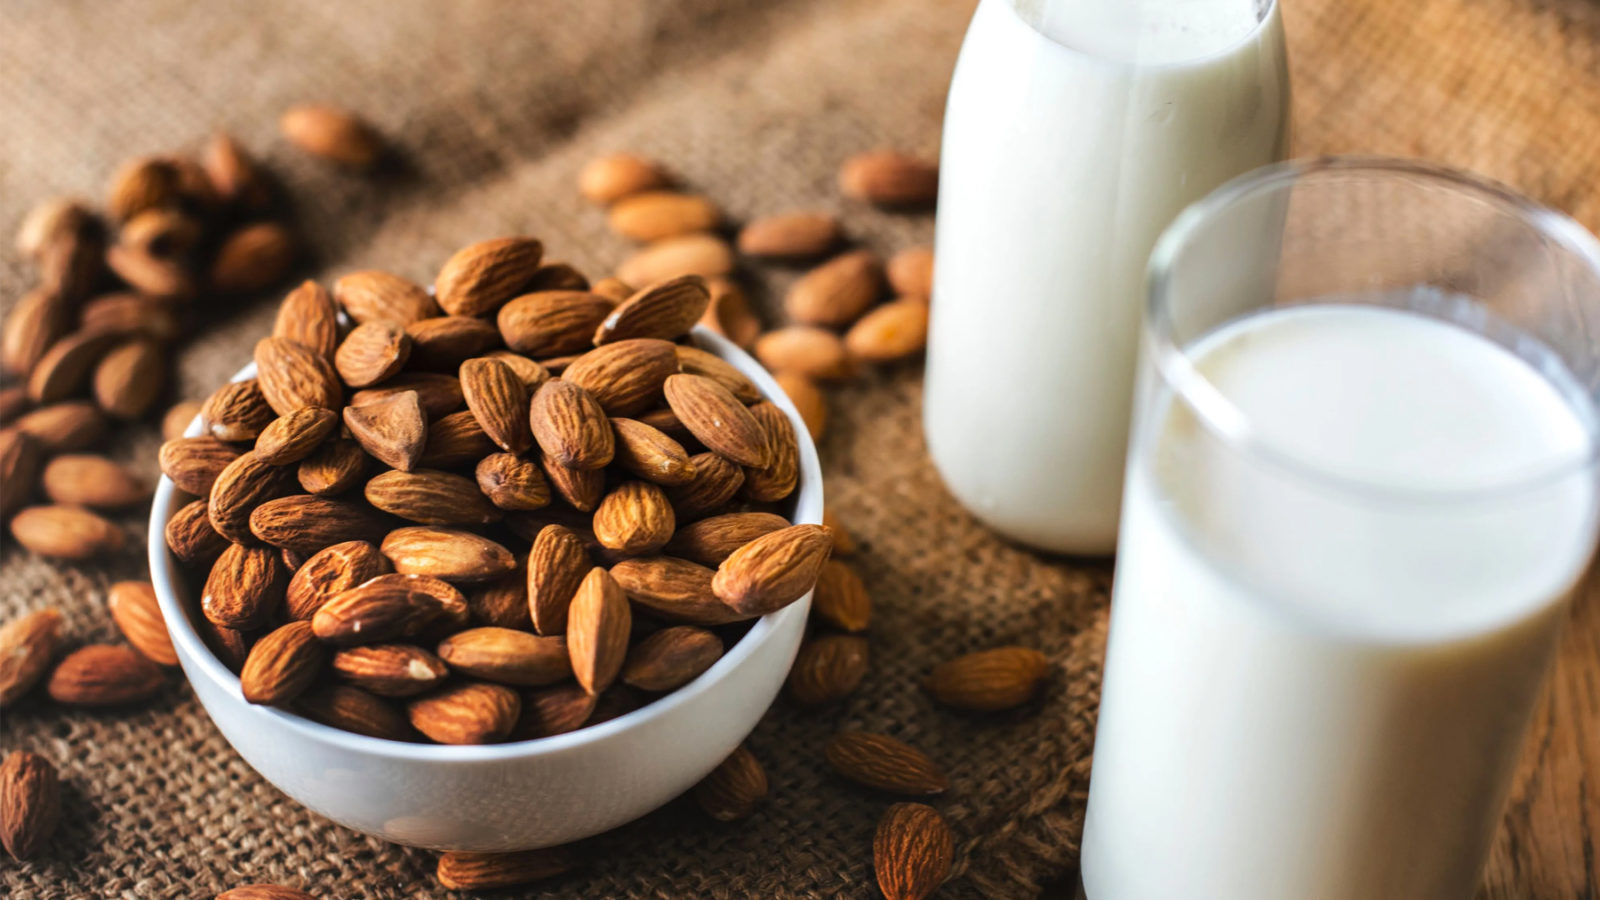 A complete guide to choosing plant-based milk alternatives